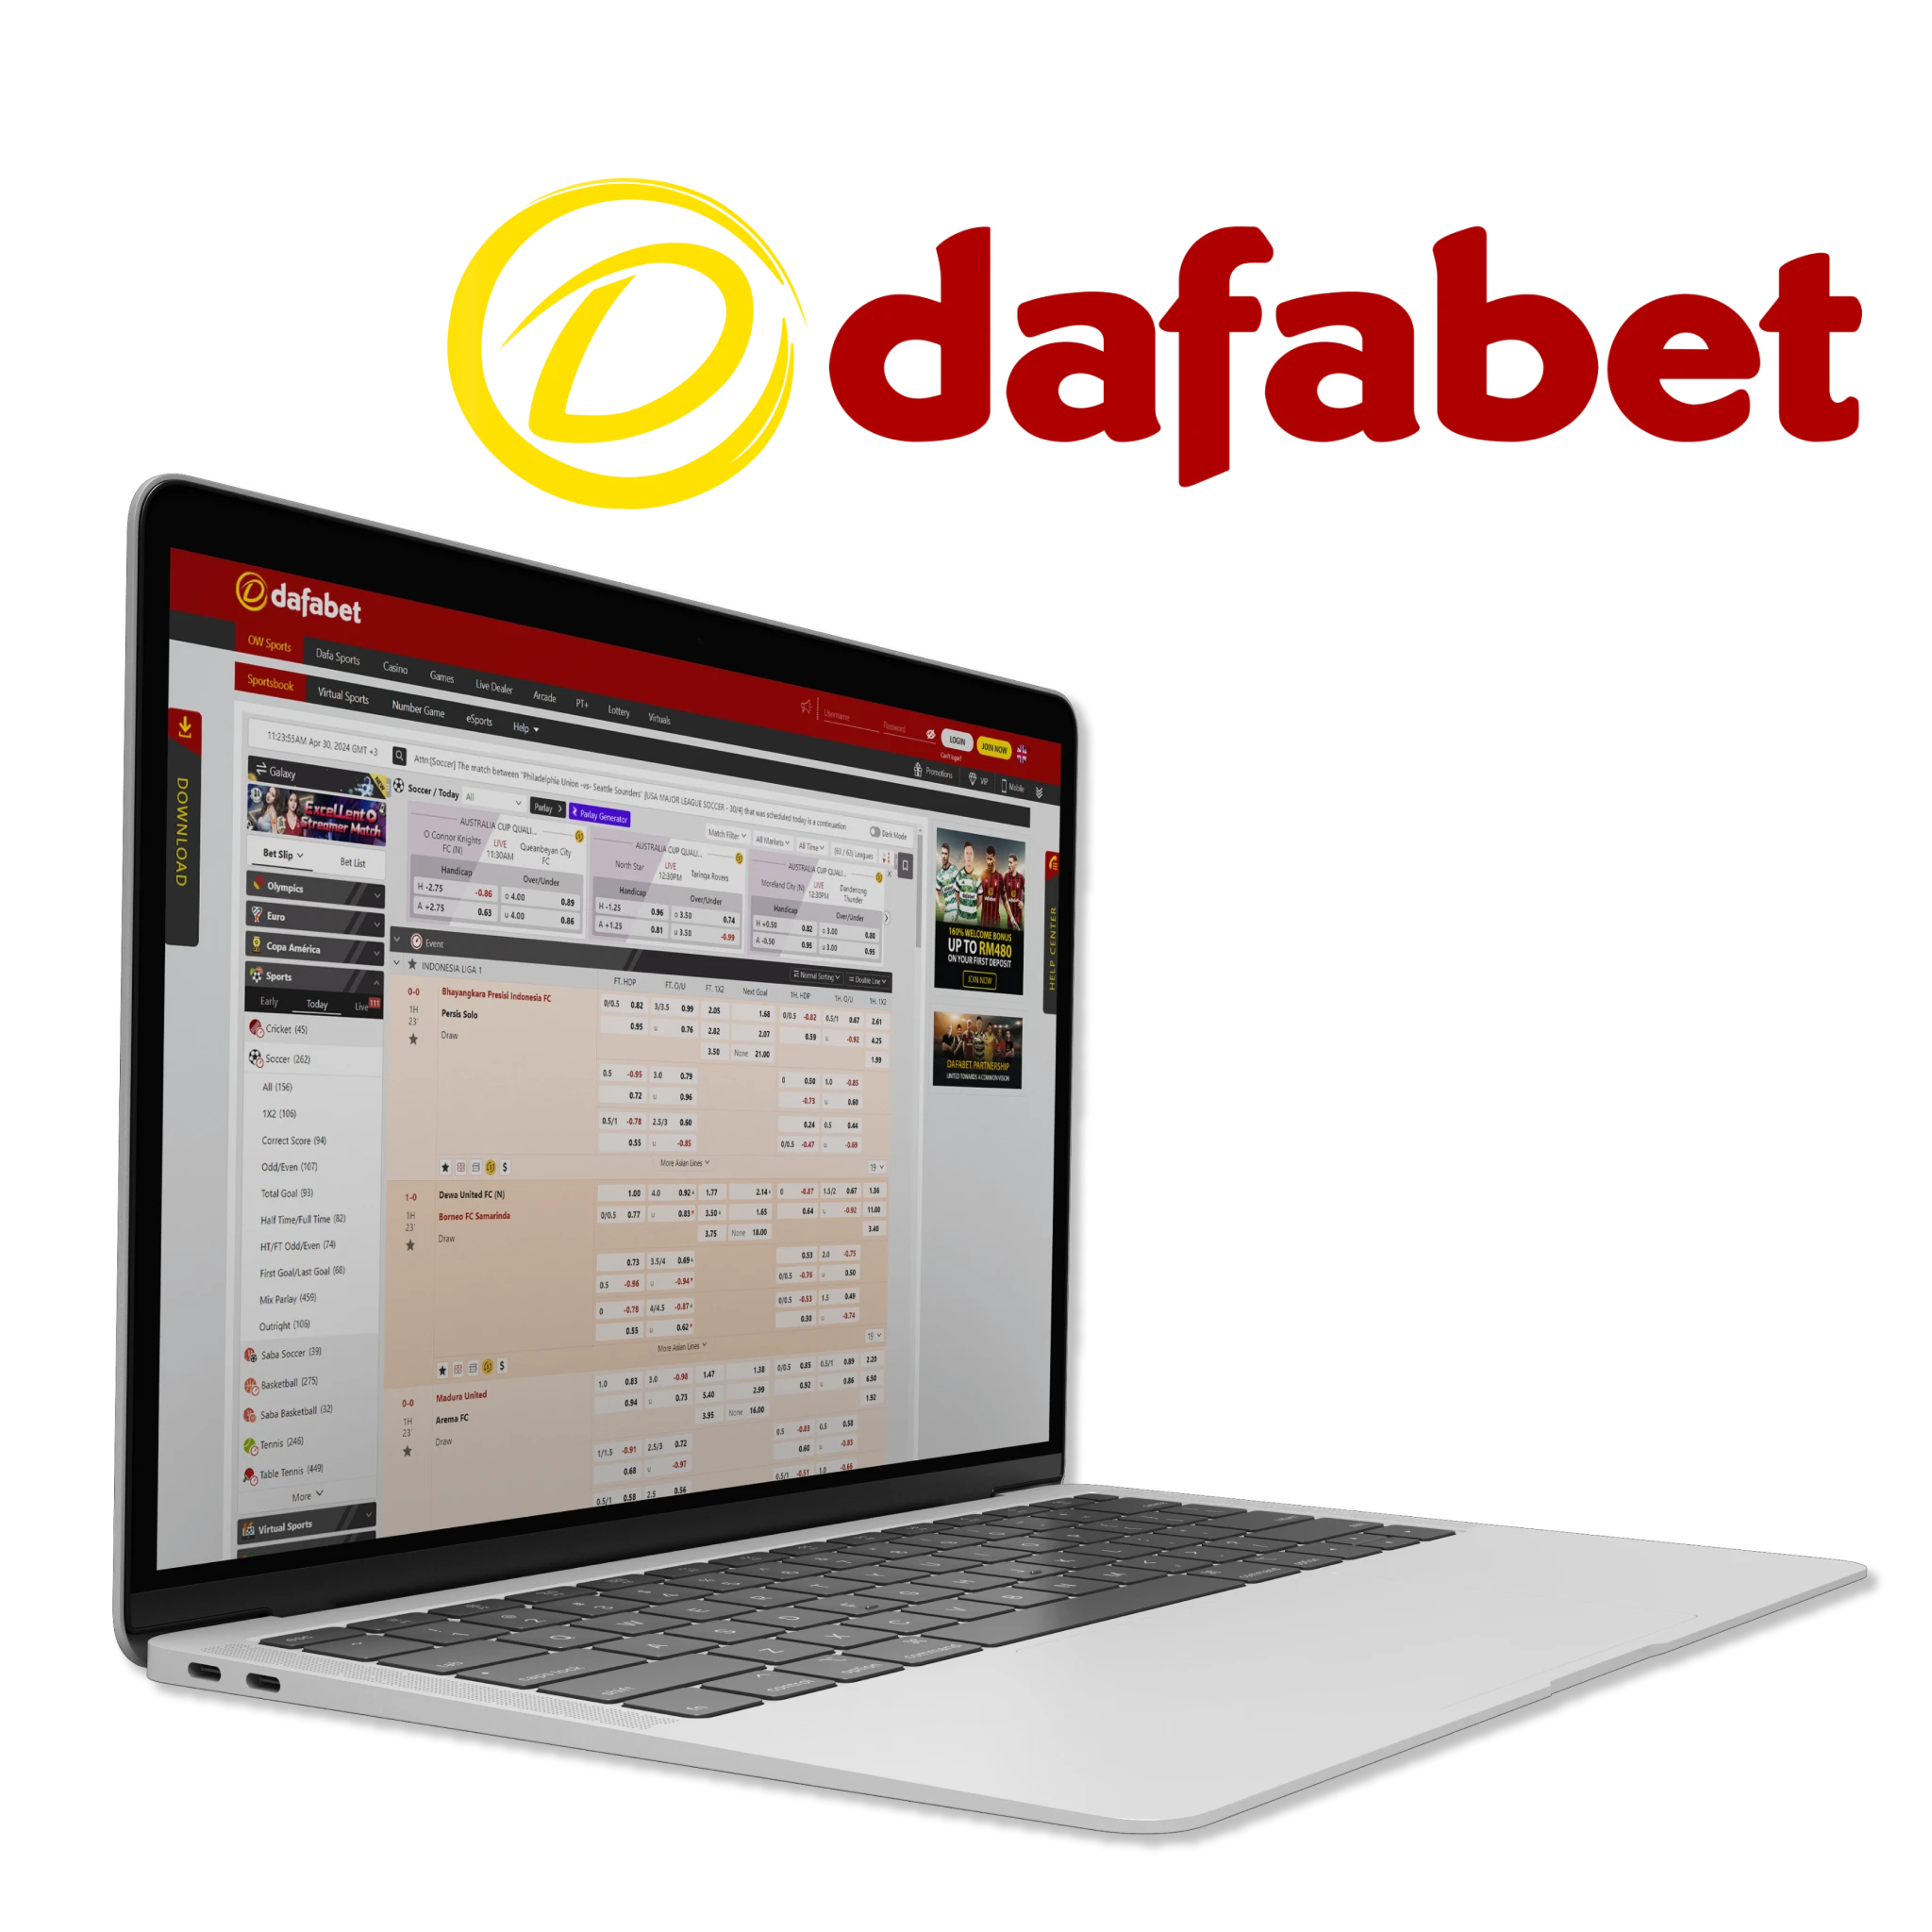 Dafabet is the choice of thousands of Indian users who are ready to win regularly from cricket betting. 